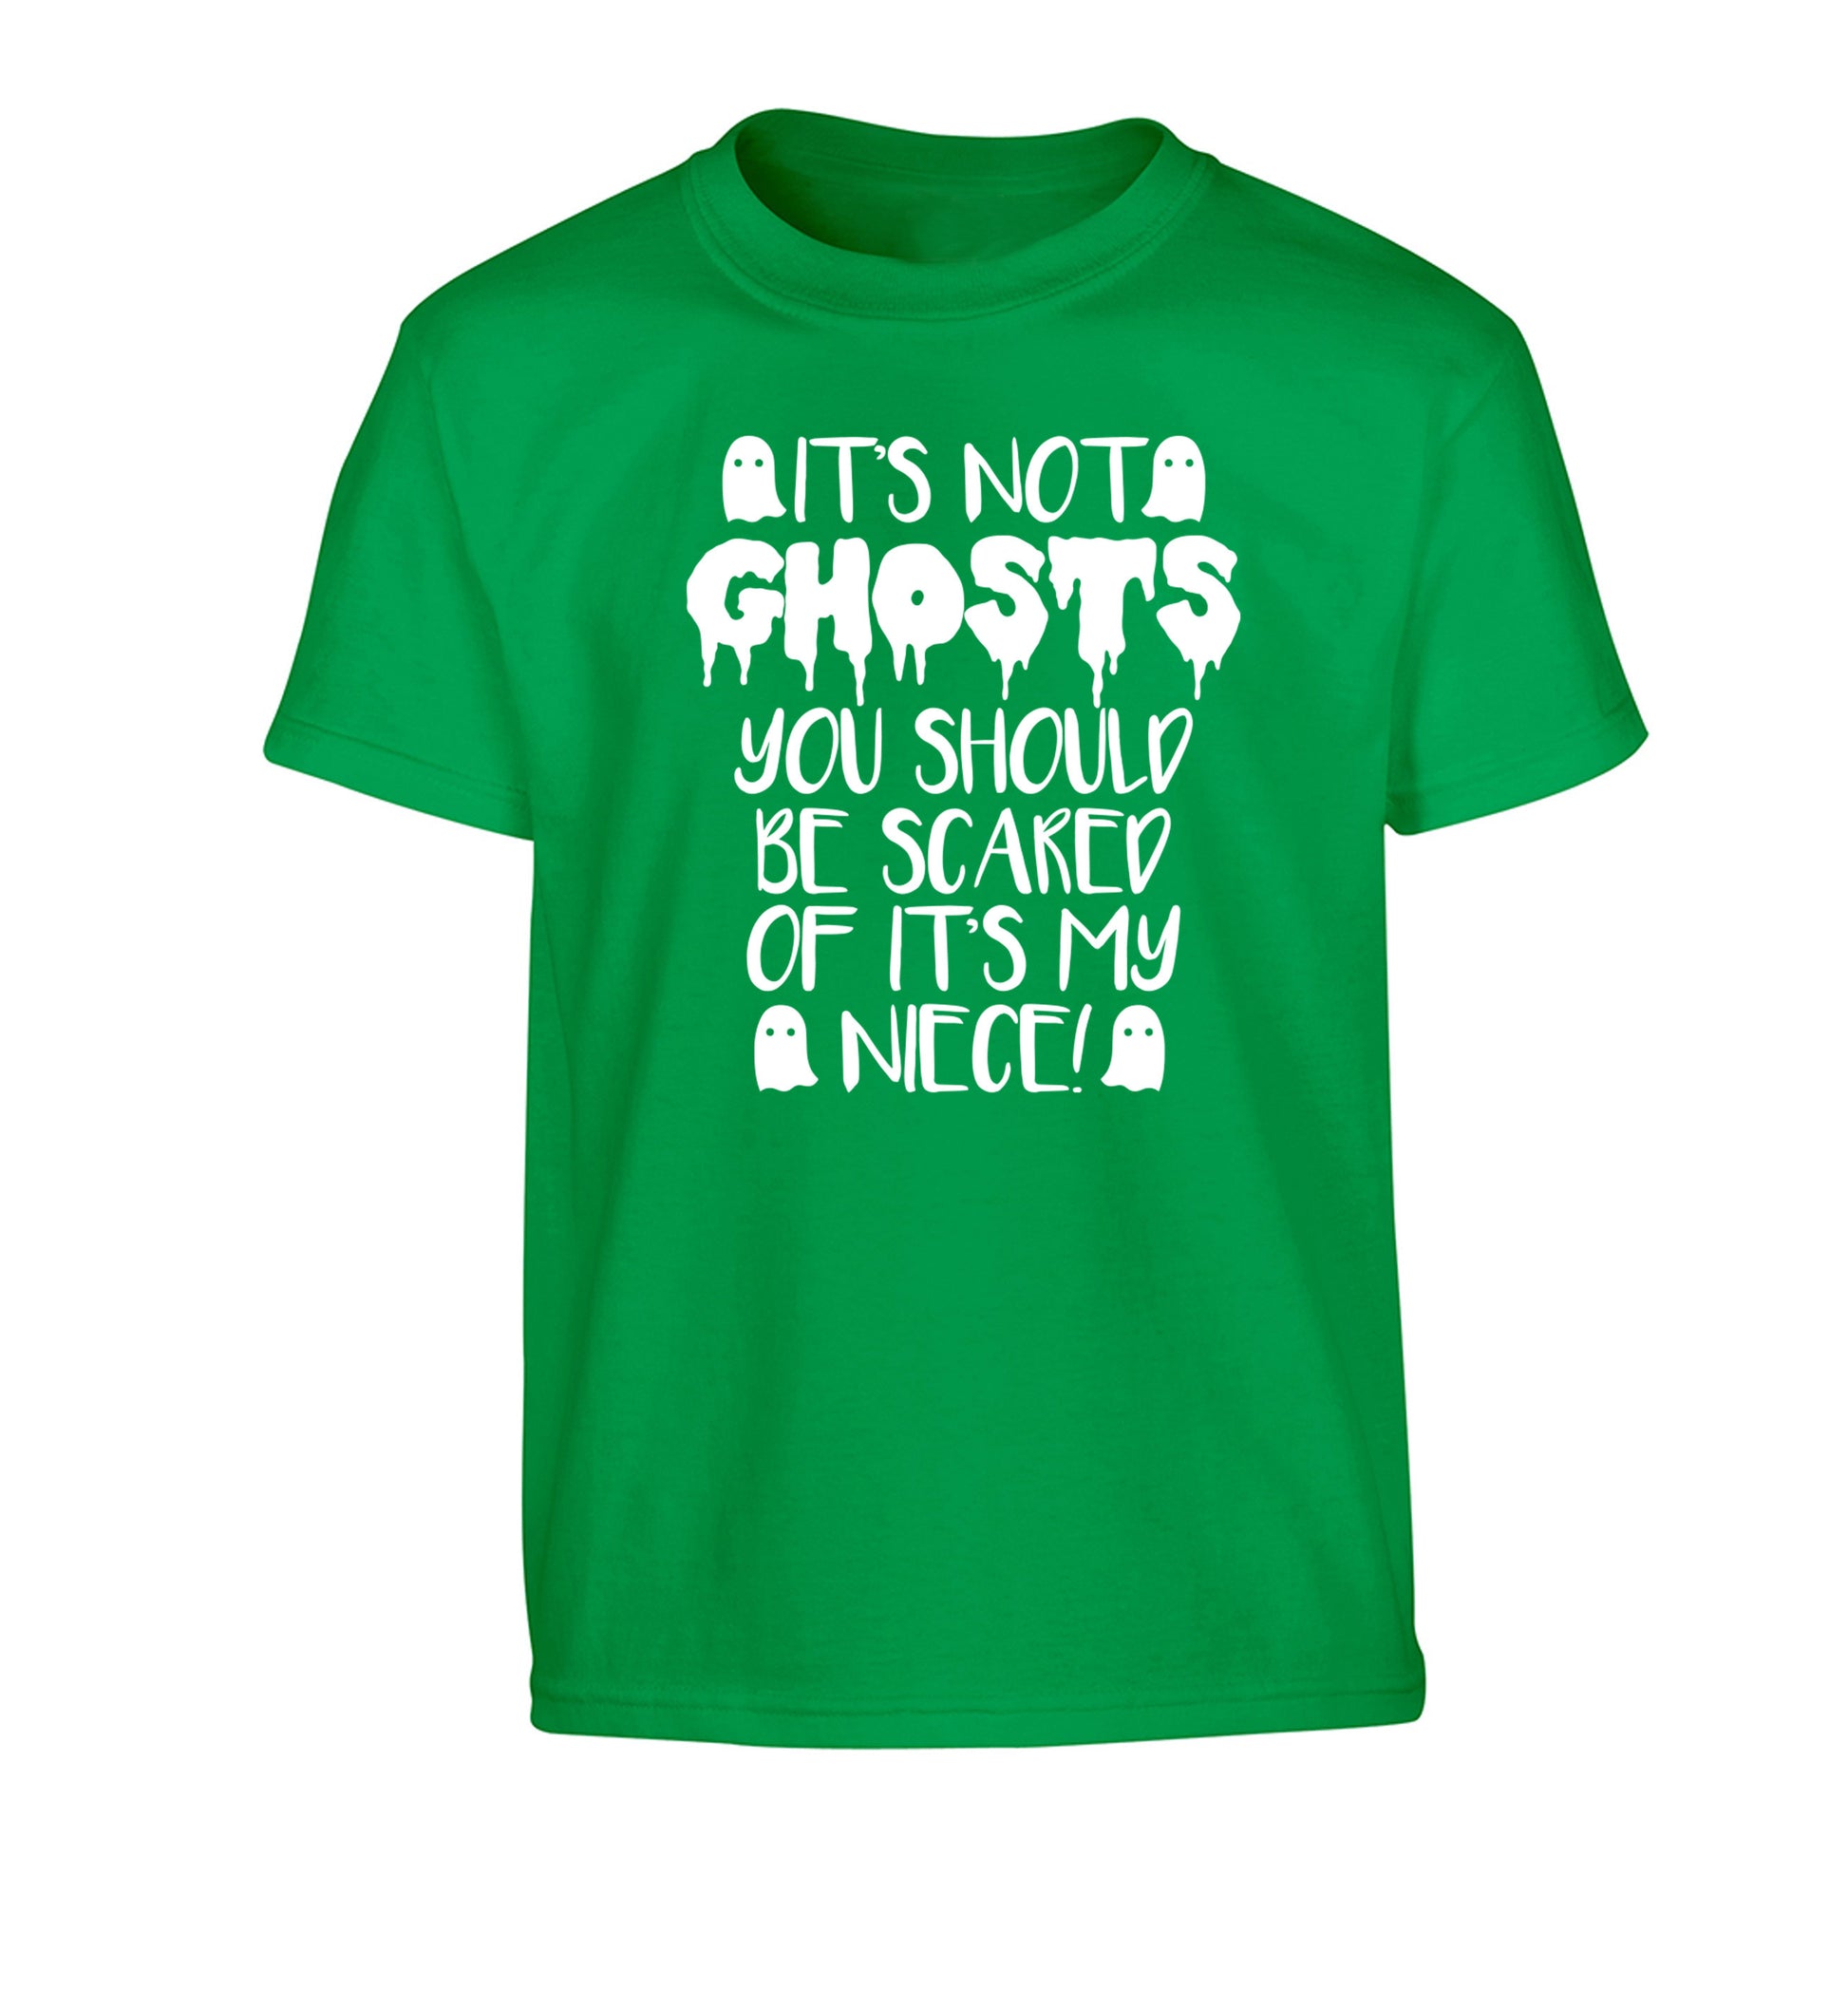 It's not ghosts you should be scared of it's my niece! Children's green Tshirt 12-14 Years